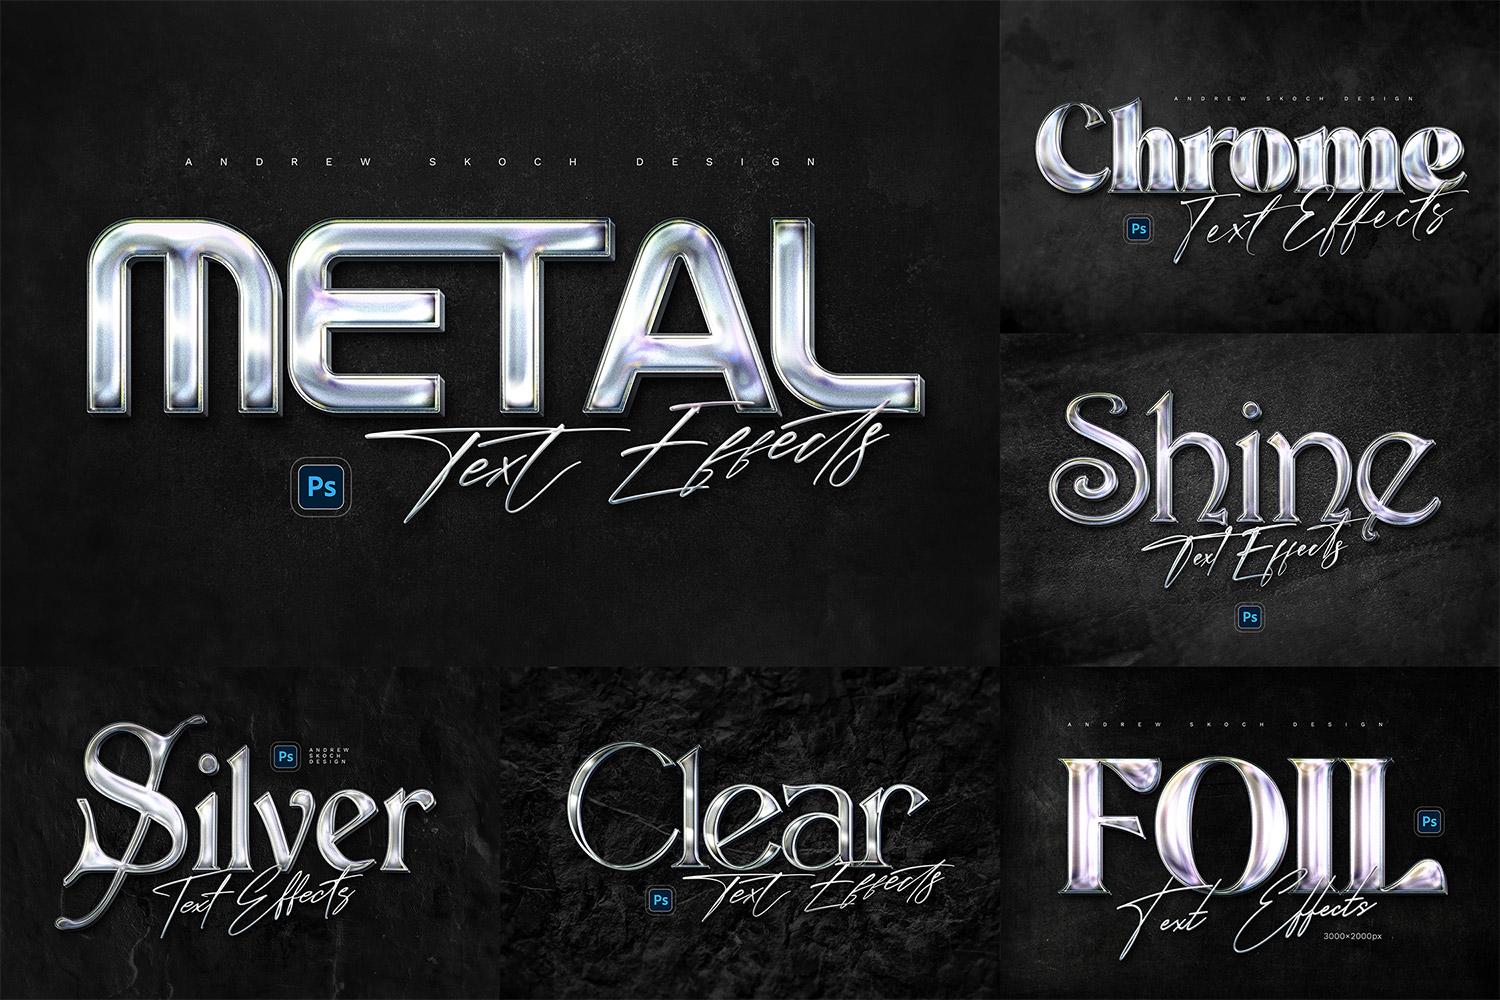 Chrome Photoshop Text Effects